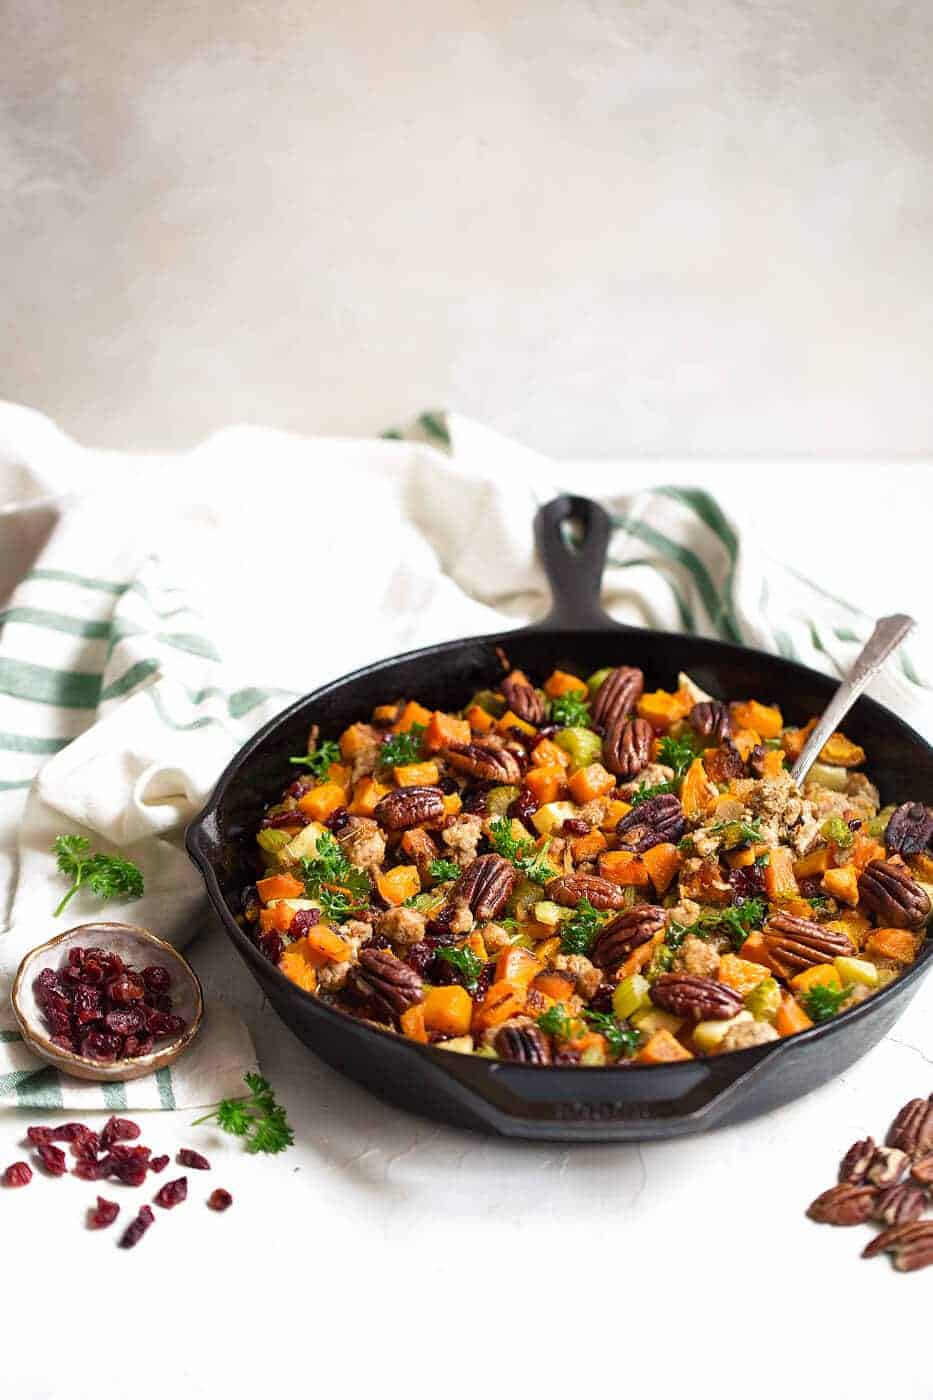 Gluten Free Stuffing with nuts and dried fruits